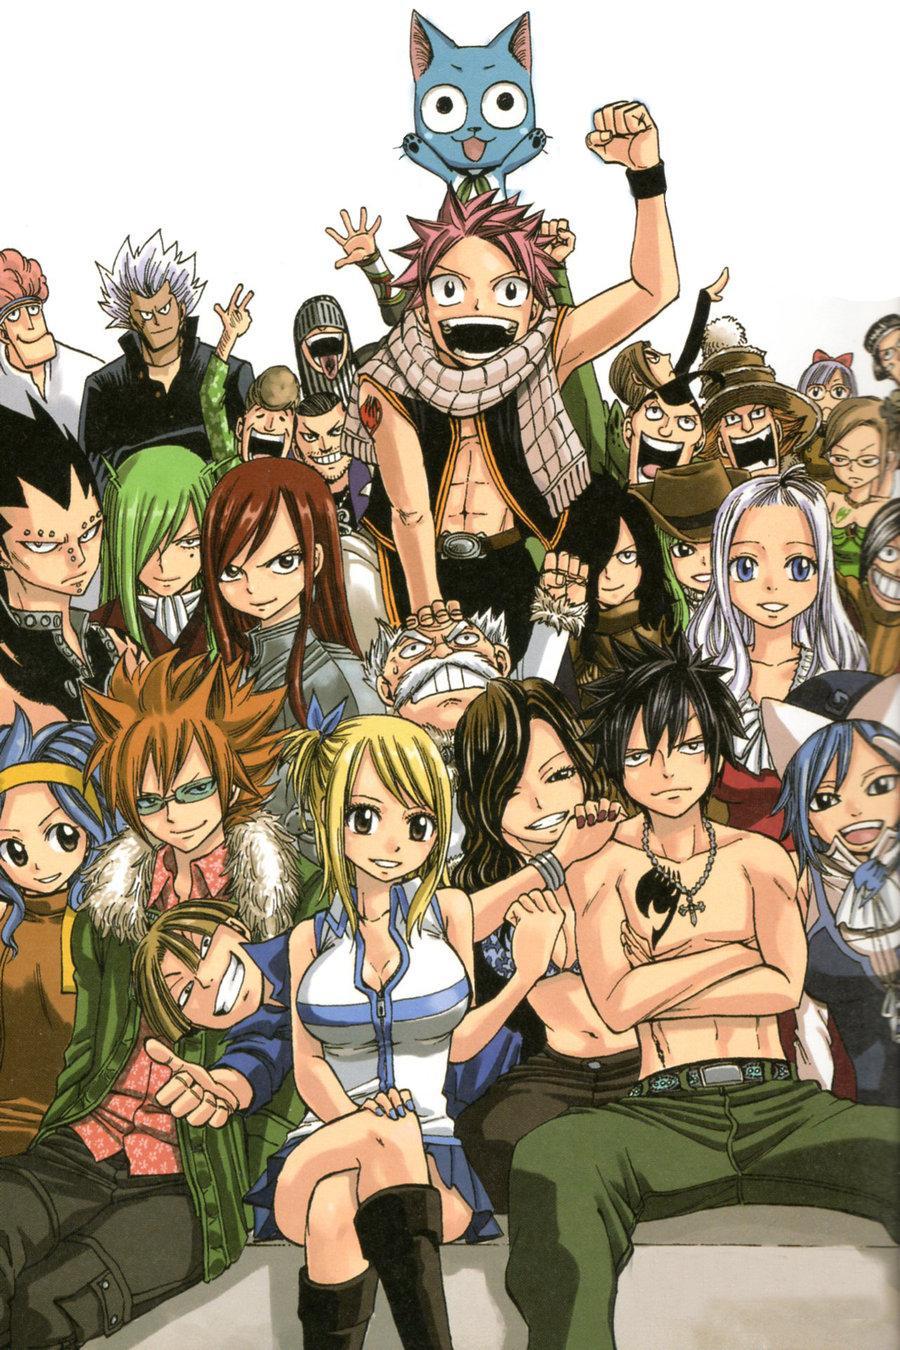 fairy tail wallpaper for android,cartoon,anime,community,illustration,fictional character